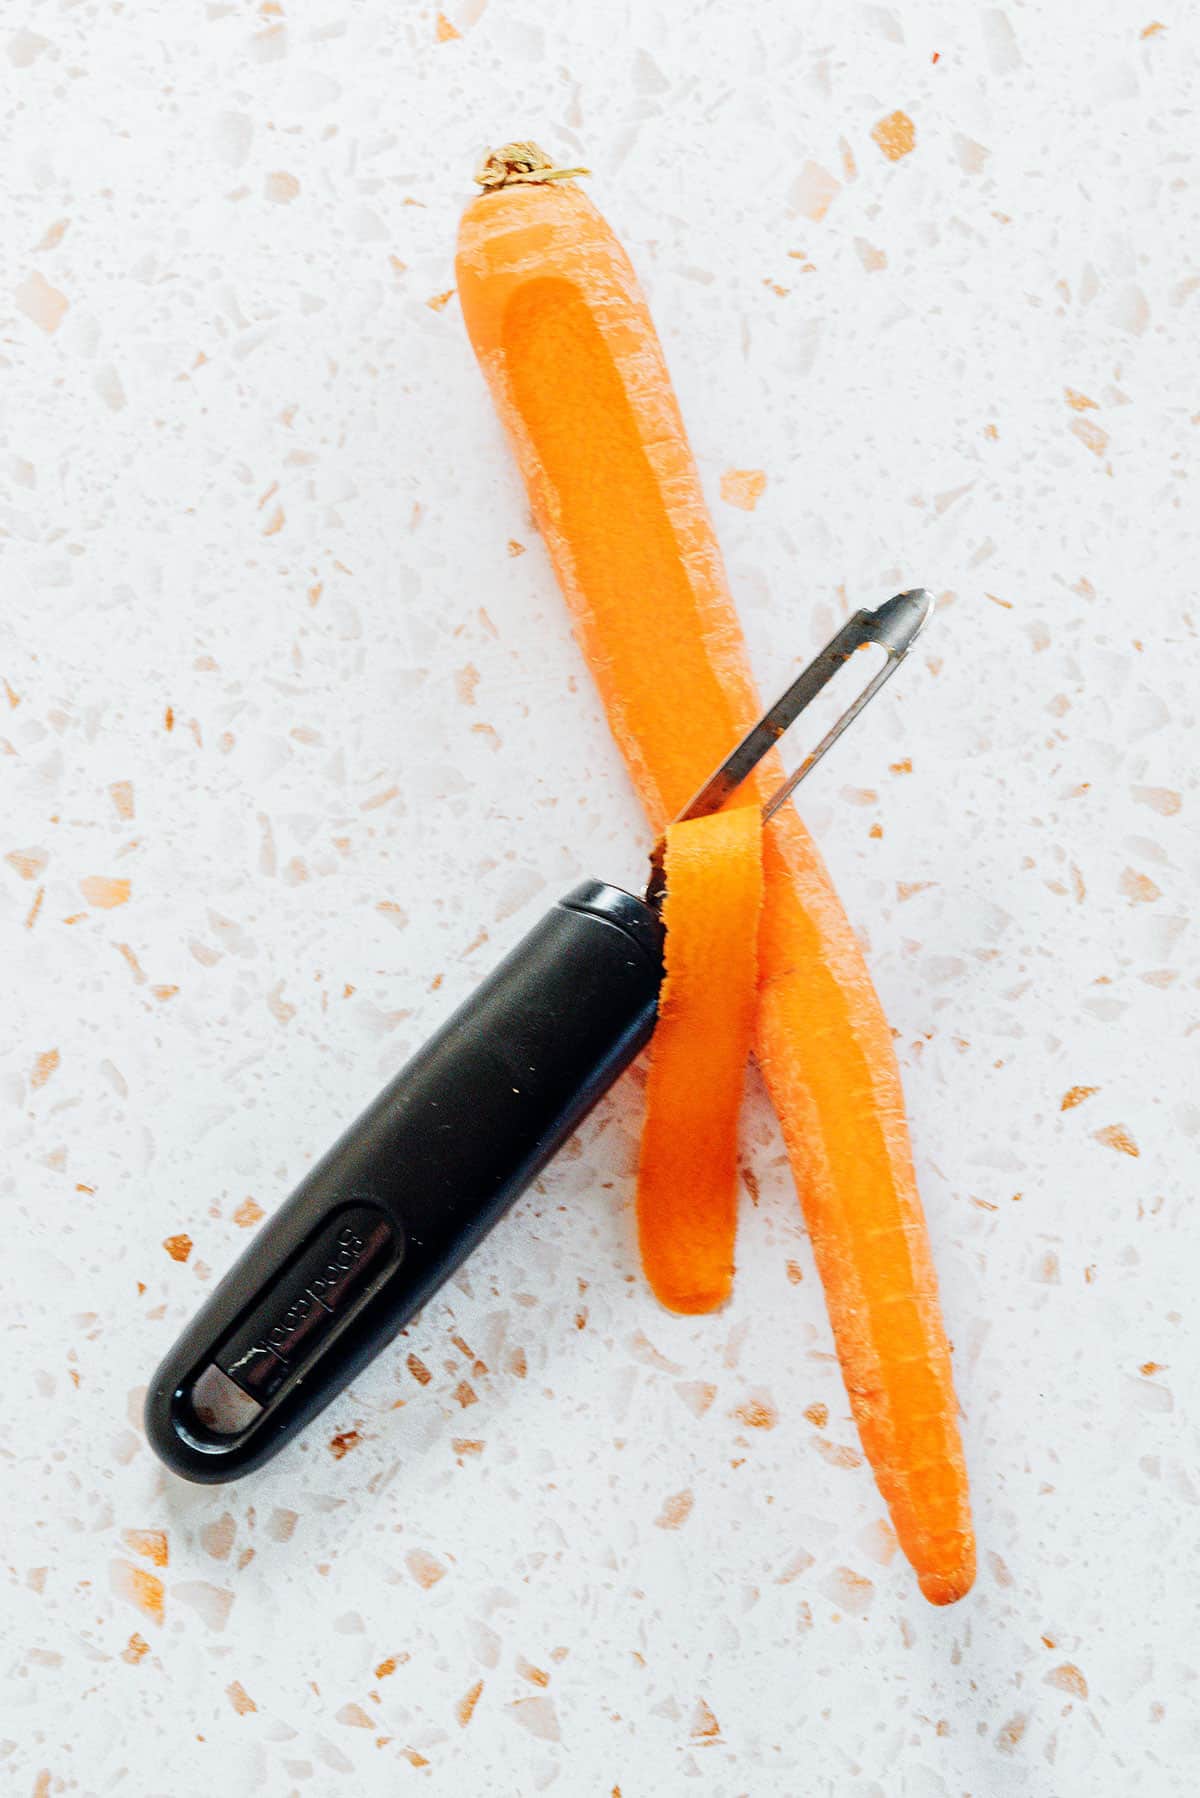 Shaving carrot noodles with a vegetable peeler